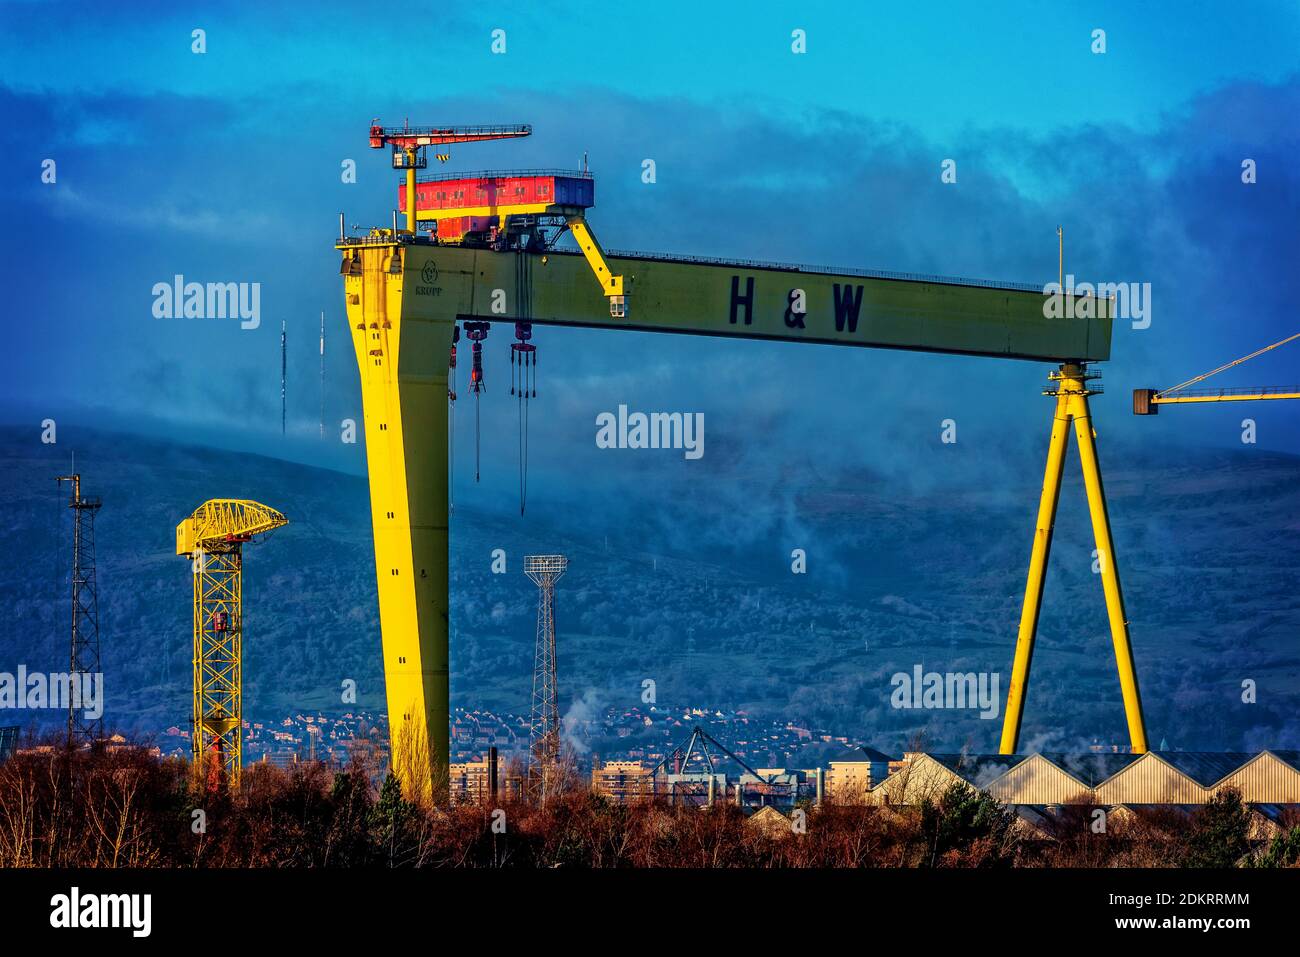 Sampson, one of two giant gantry cranes at Harland & Wolff shipyard in Belfast, Northern Ireland, birthplace of Olympic & Titanic. Along with it's old Stock Photo